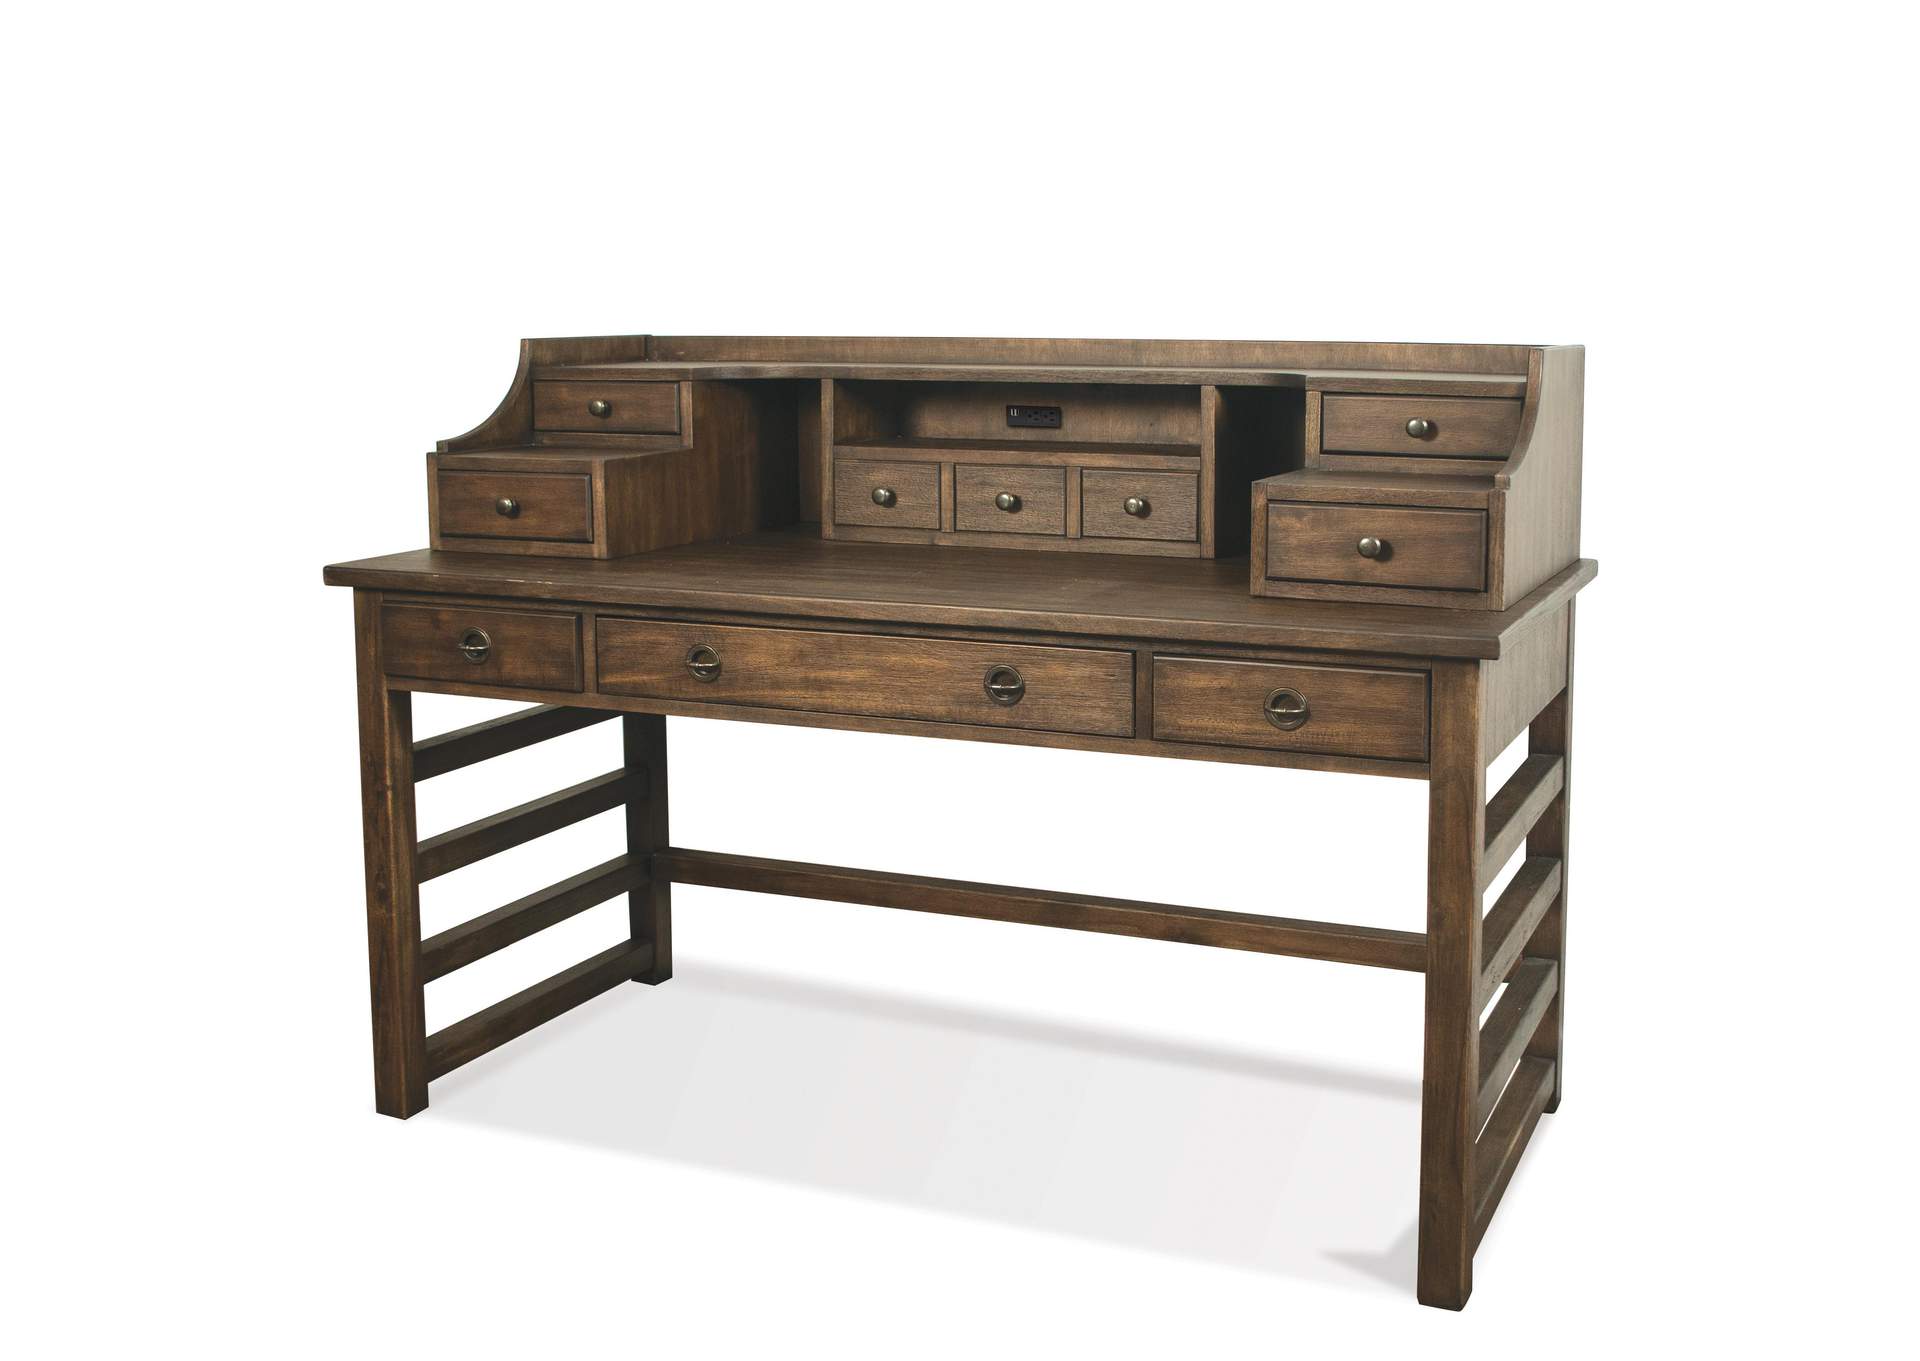 Perspectives Brushed Acacia Leg Desk With Hutch,Riverside